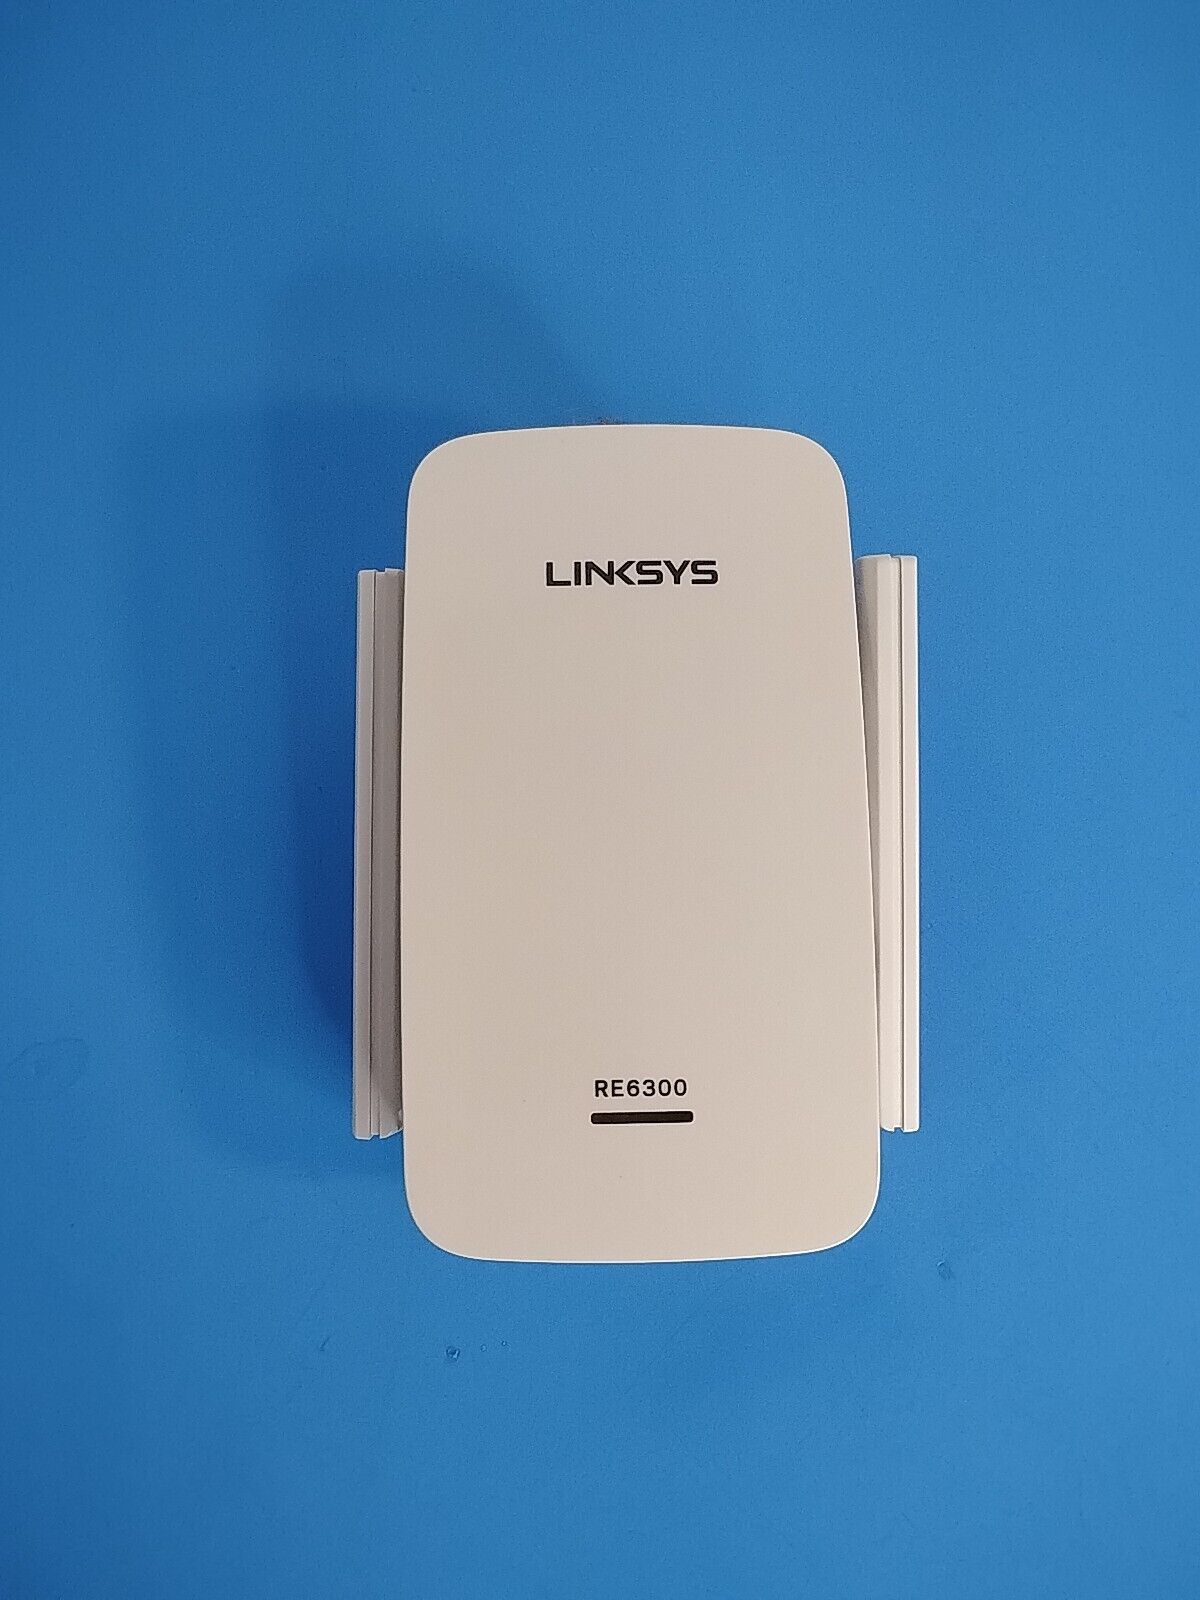 Linksys RE6300 AC1200 BOOST EX WiFi Extender 802.11ac Wireless Repeater